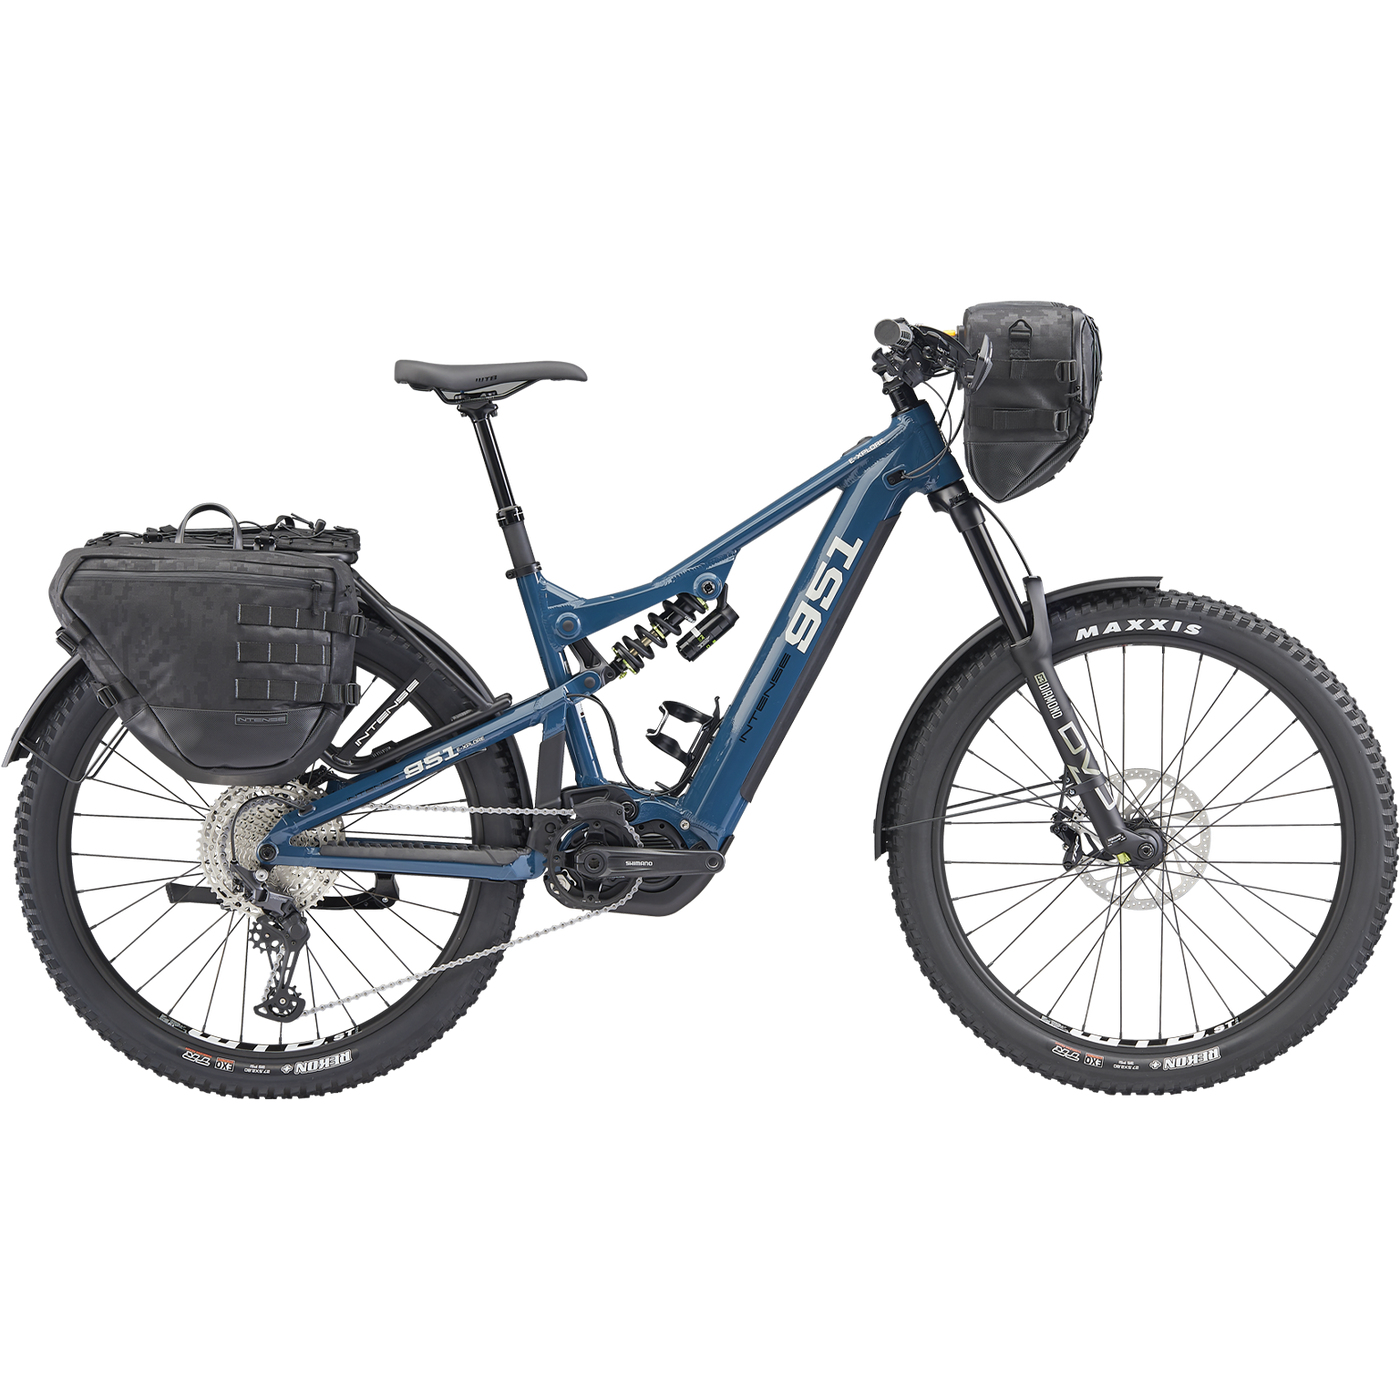 Shop INTENSE Cycles E-XPLORE E Mountain Bike eBike for sale online or at any authorized dealers. 